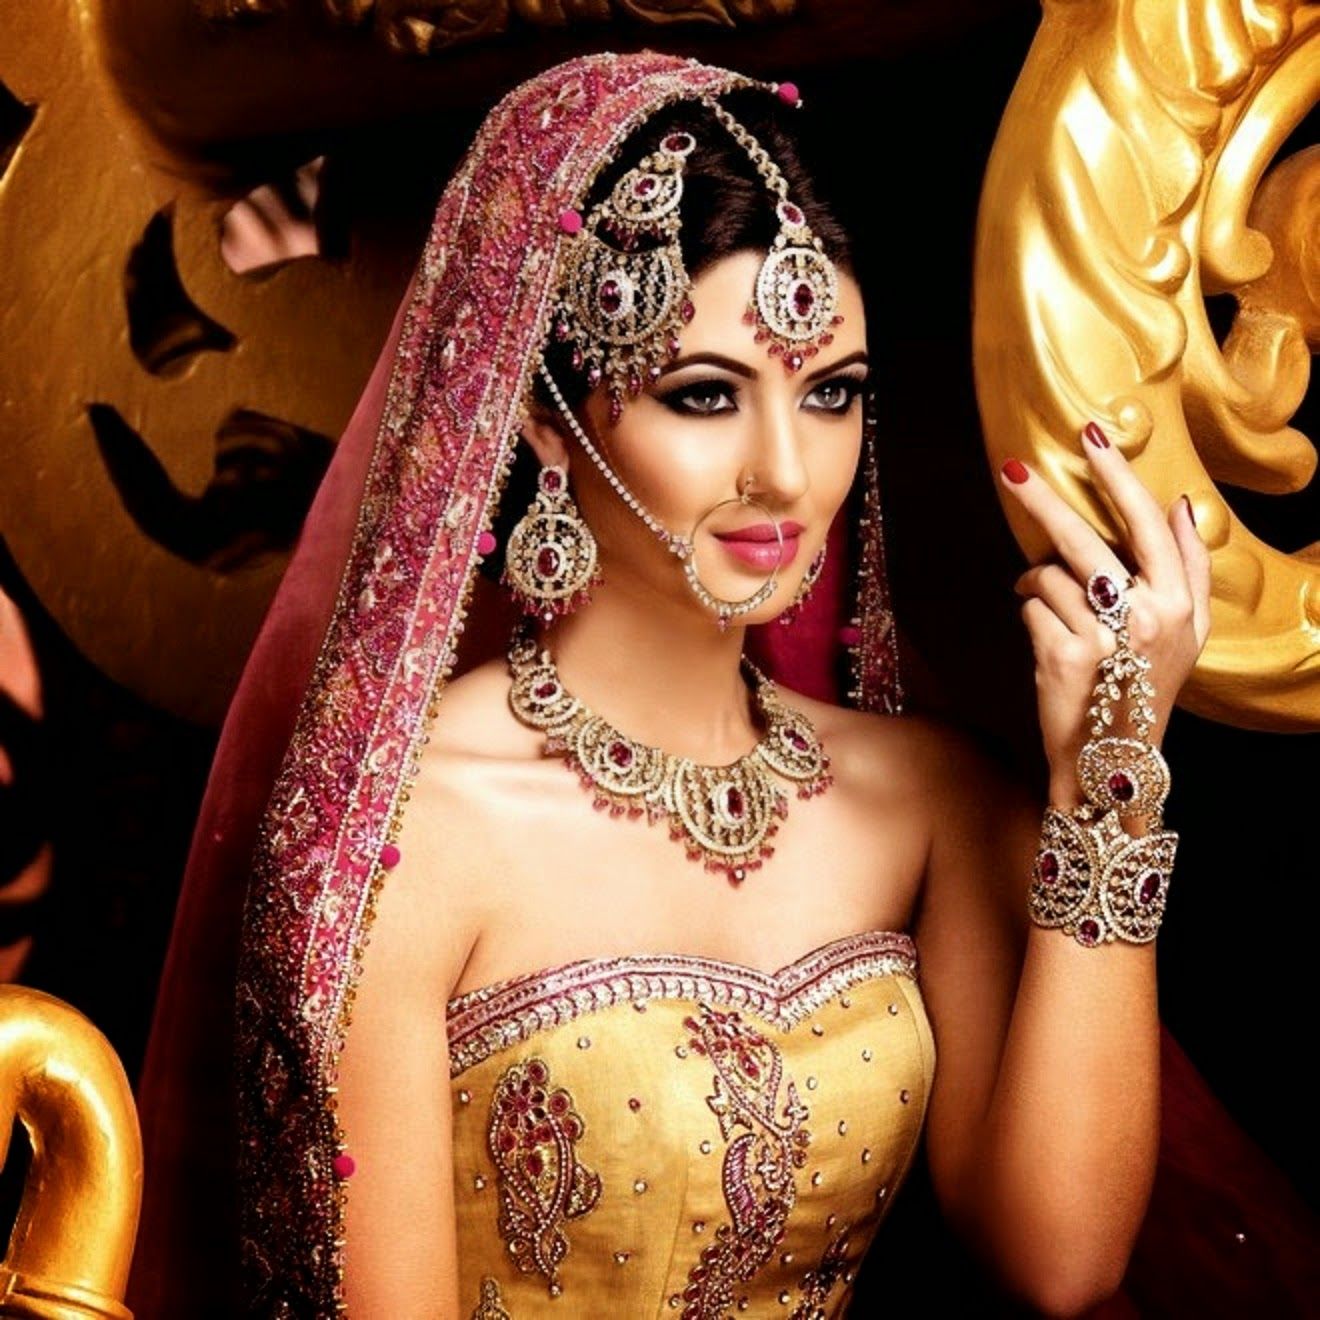 FREE ALL HD WALLPAPERS DOWNLOAD: Beautiful Indian Bridal Jewellery Set For Samples 2014 -2015 Wallpaper Free Download